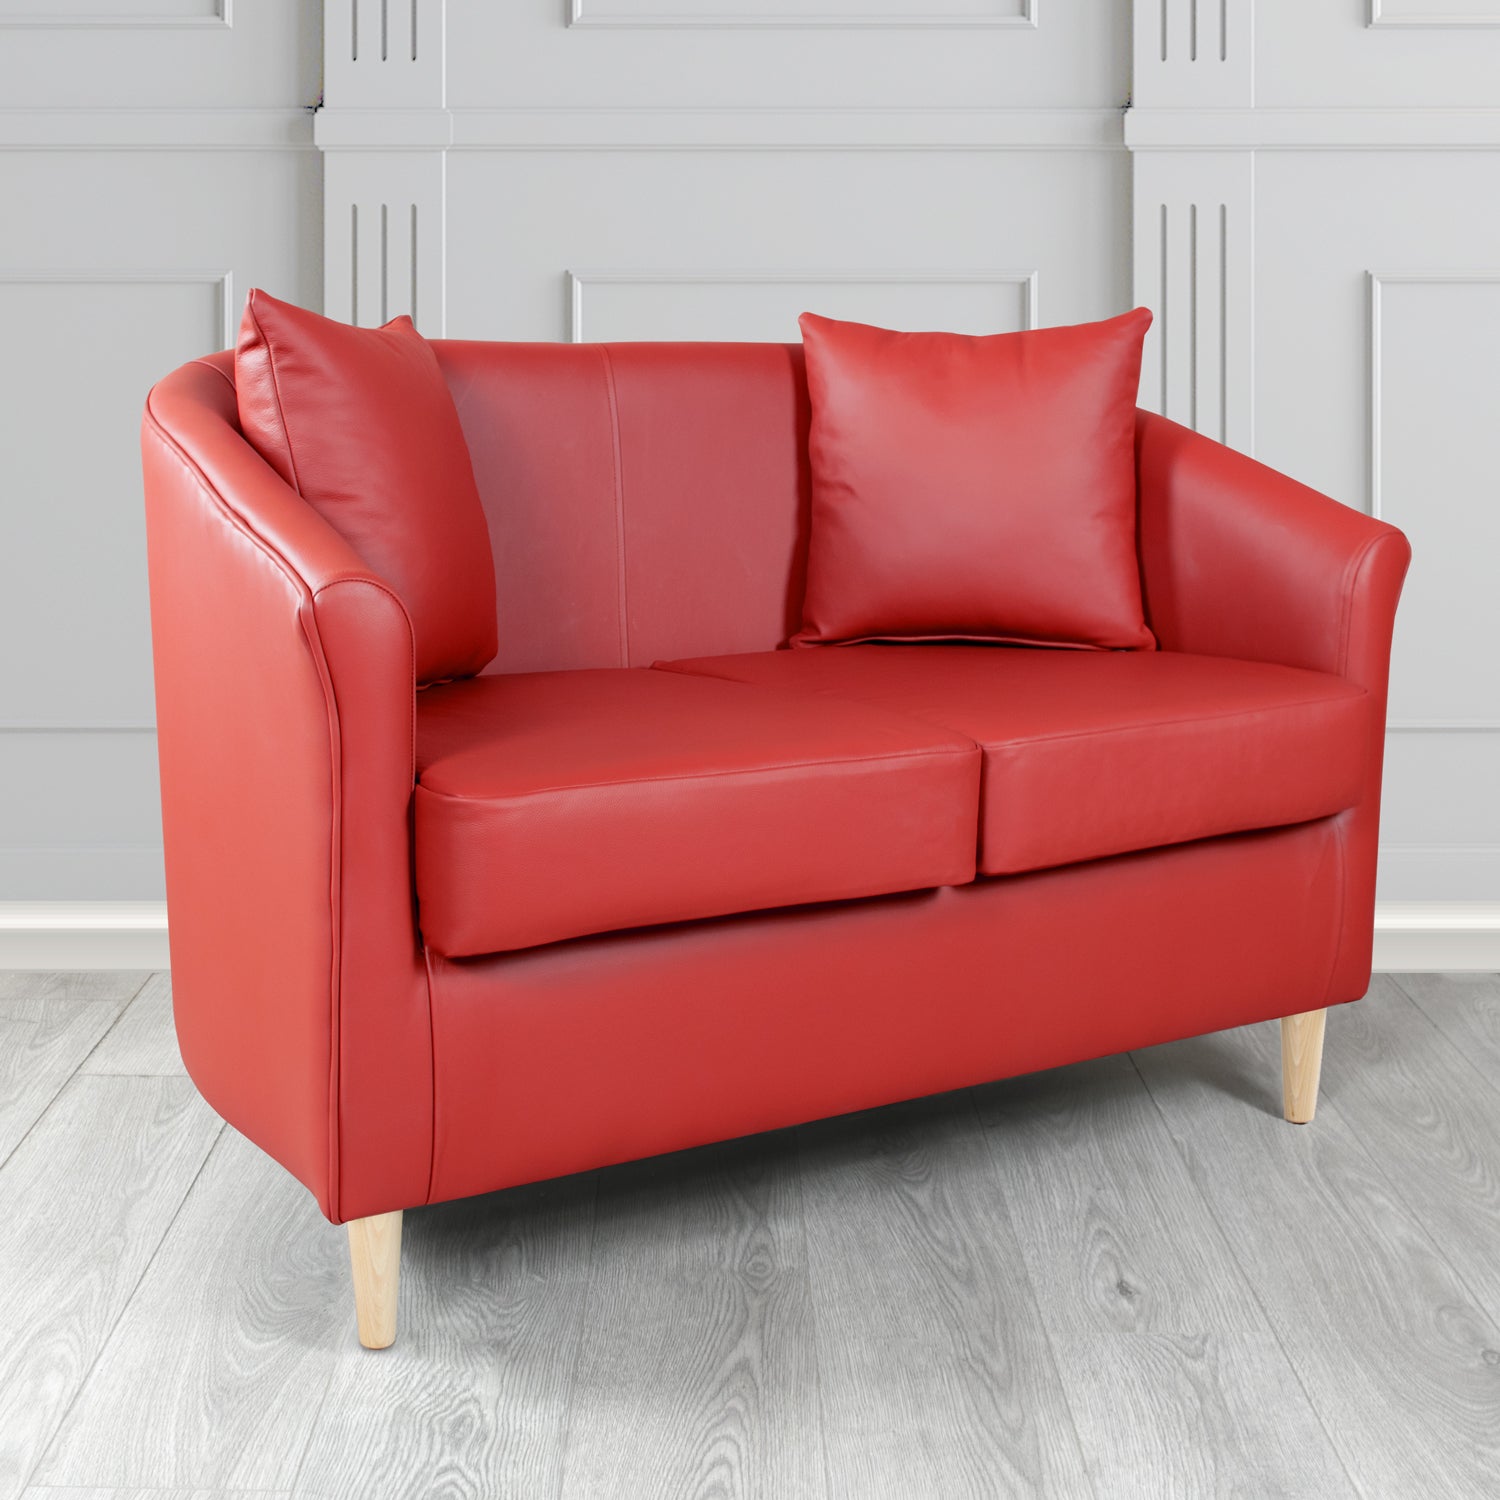 St Tropez Shelly Crimson Crib 5 Genuine Leather 2 Seater Tub Sofa with Scatter Cushions - The Tub Chair Shop